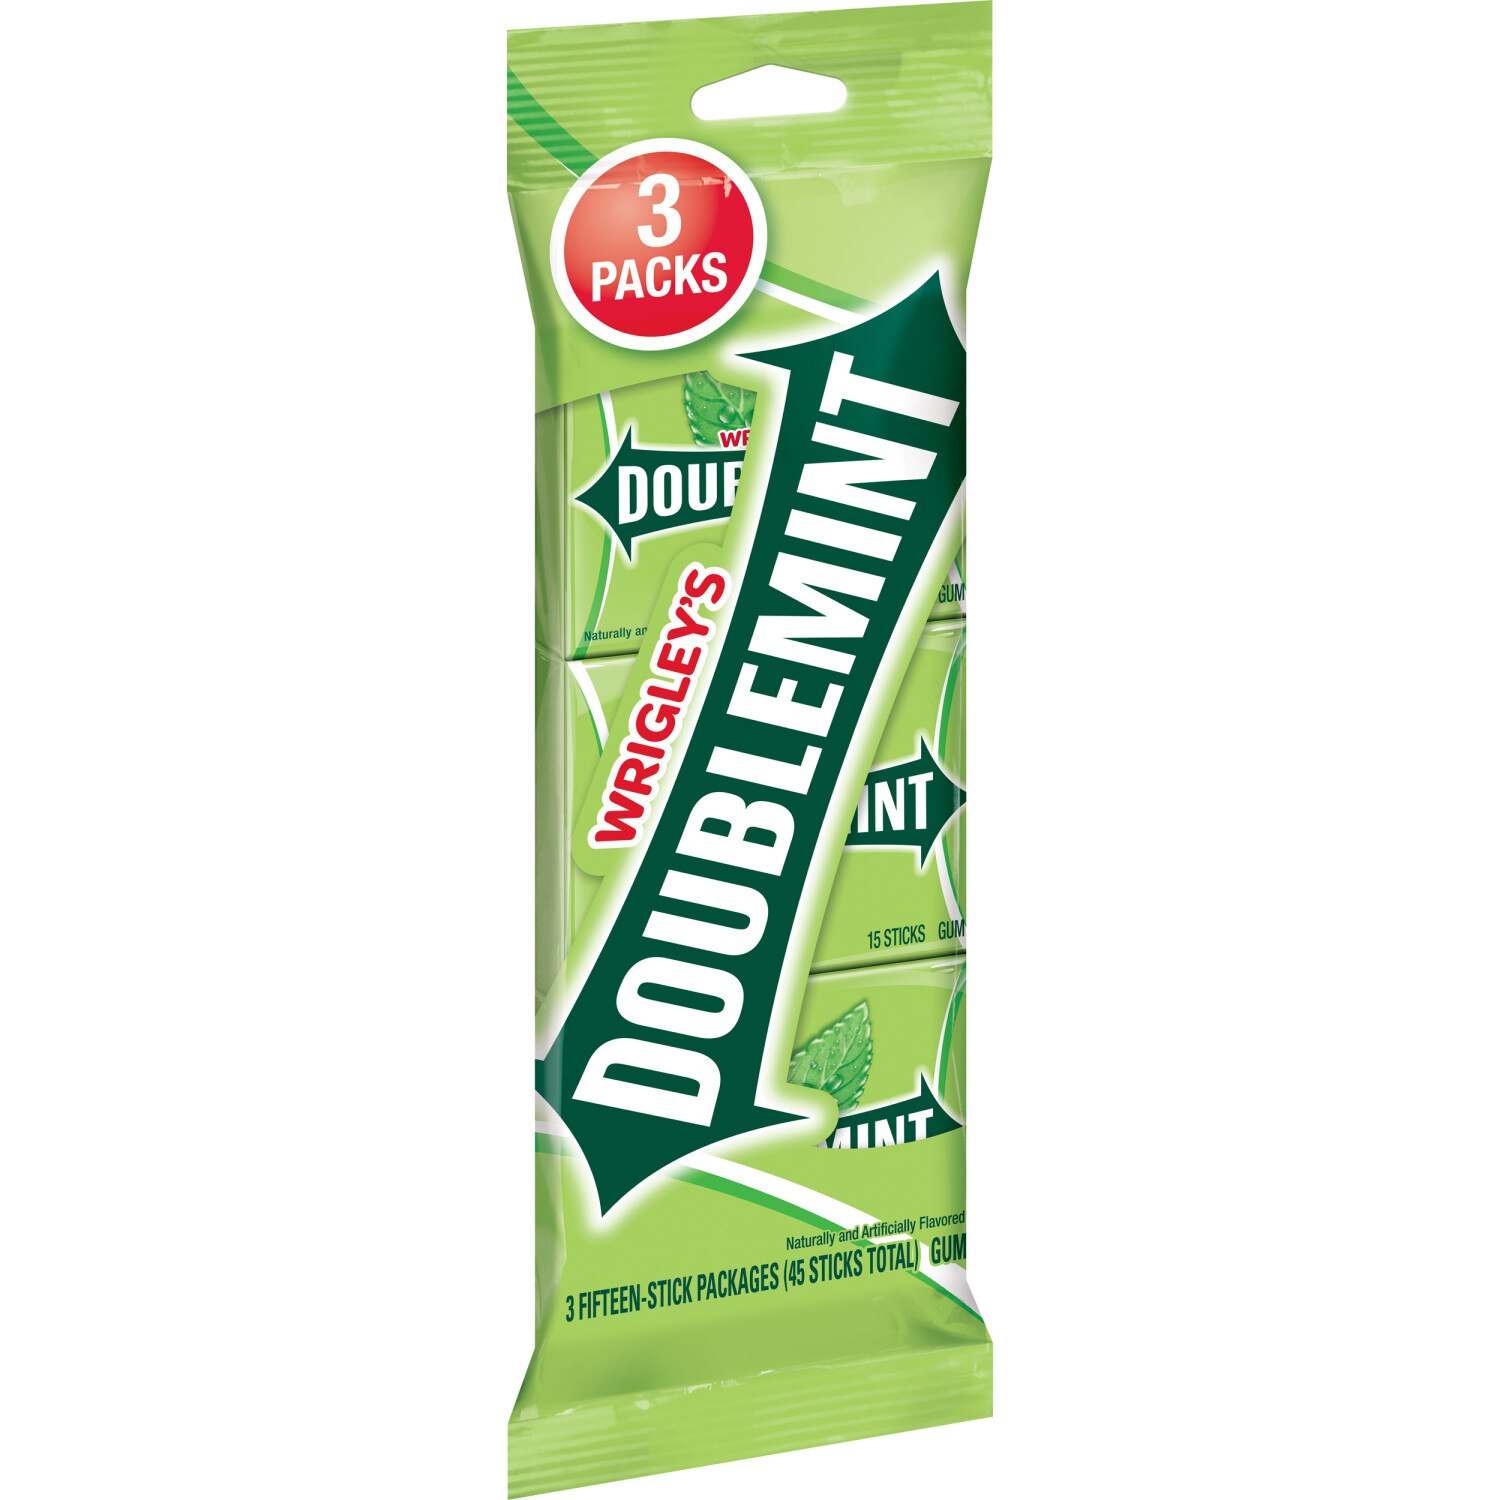 Wrigley's Doublemint Bulk Chewing Gum, Value Pack, 15 ct, 3 Pack